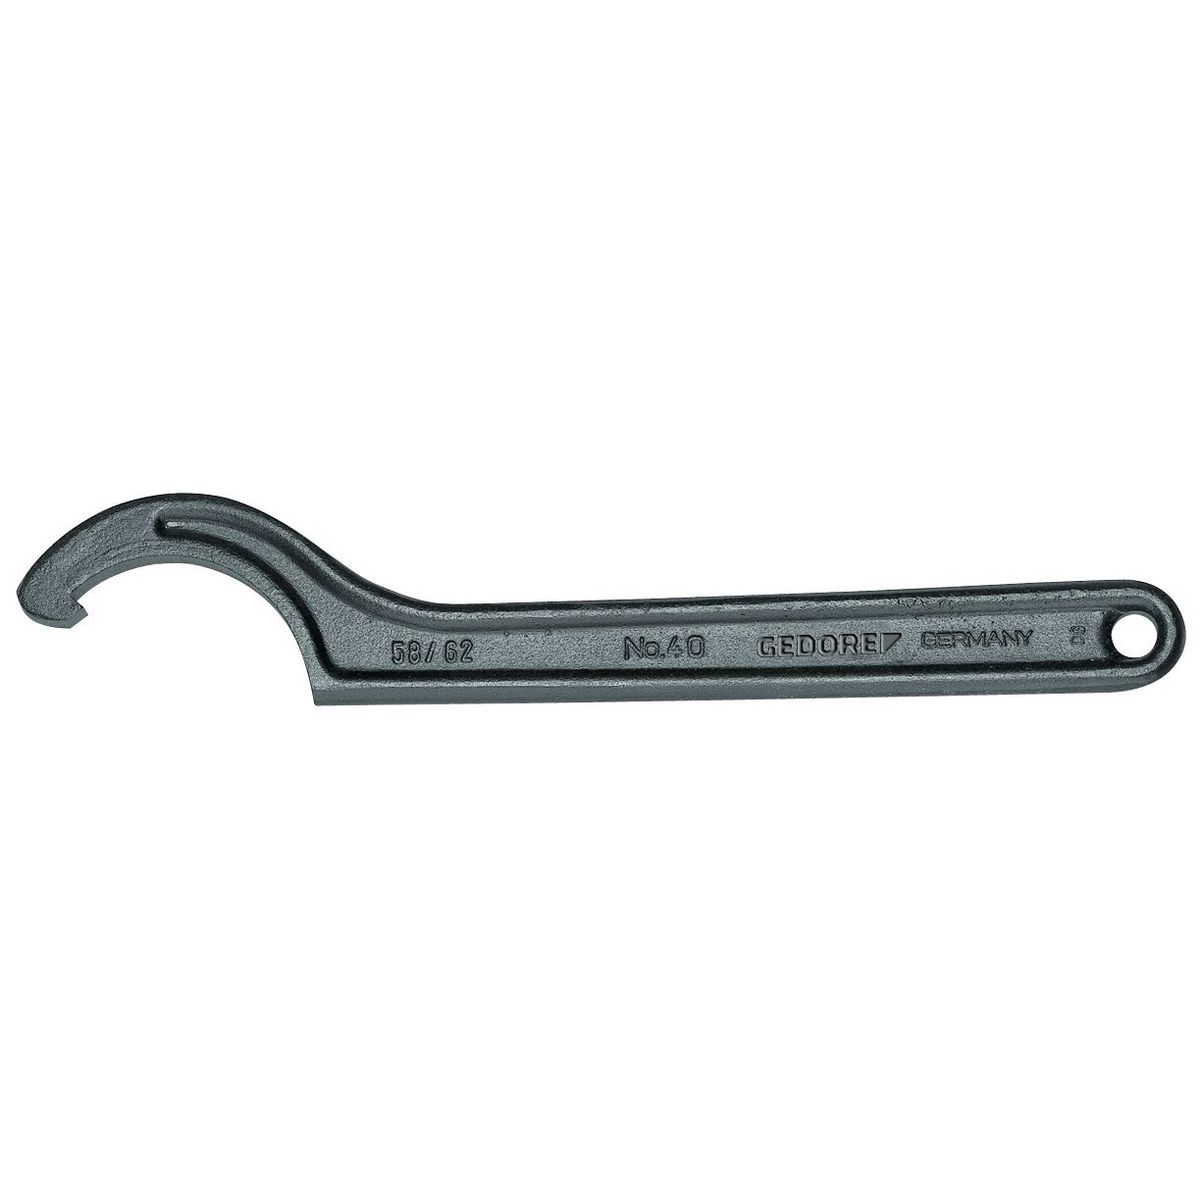 Hook wrench with lug, 180-195mm No.40 180-195 Gedore